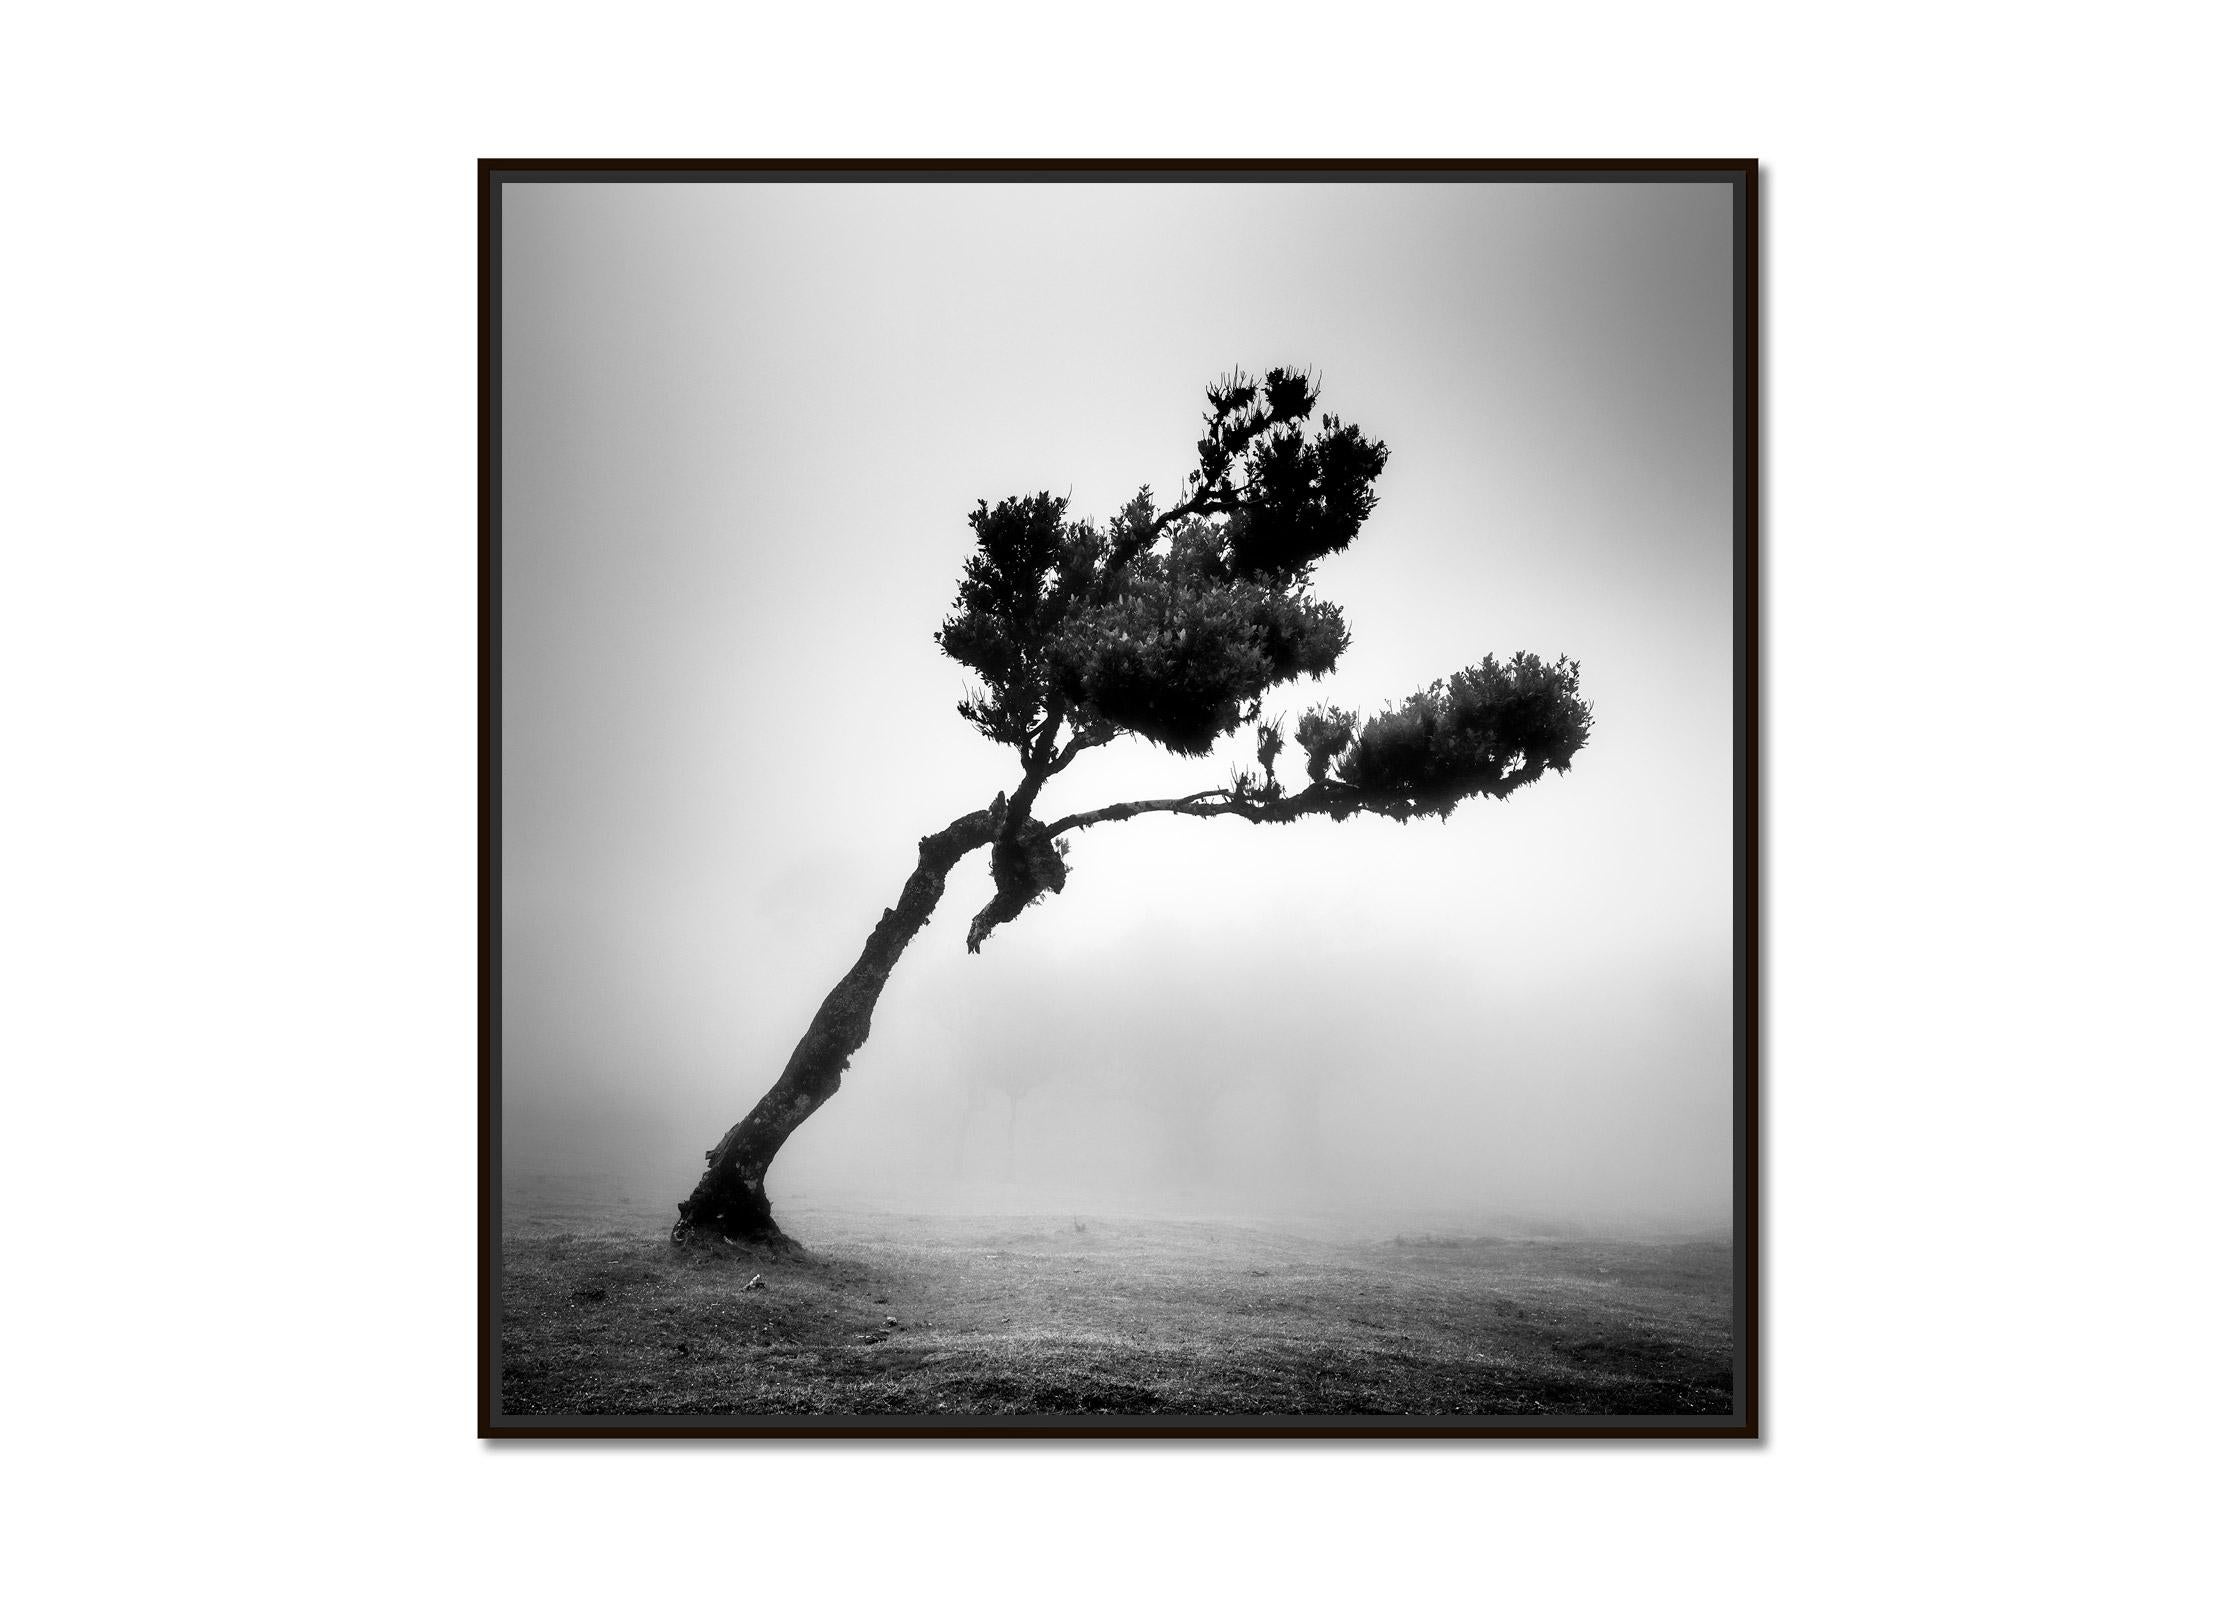 Deer in fairy Forest, mystical Tree, Madeira, black & white landscape art photo  - Photograph by Gerald Berghammer